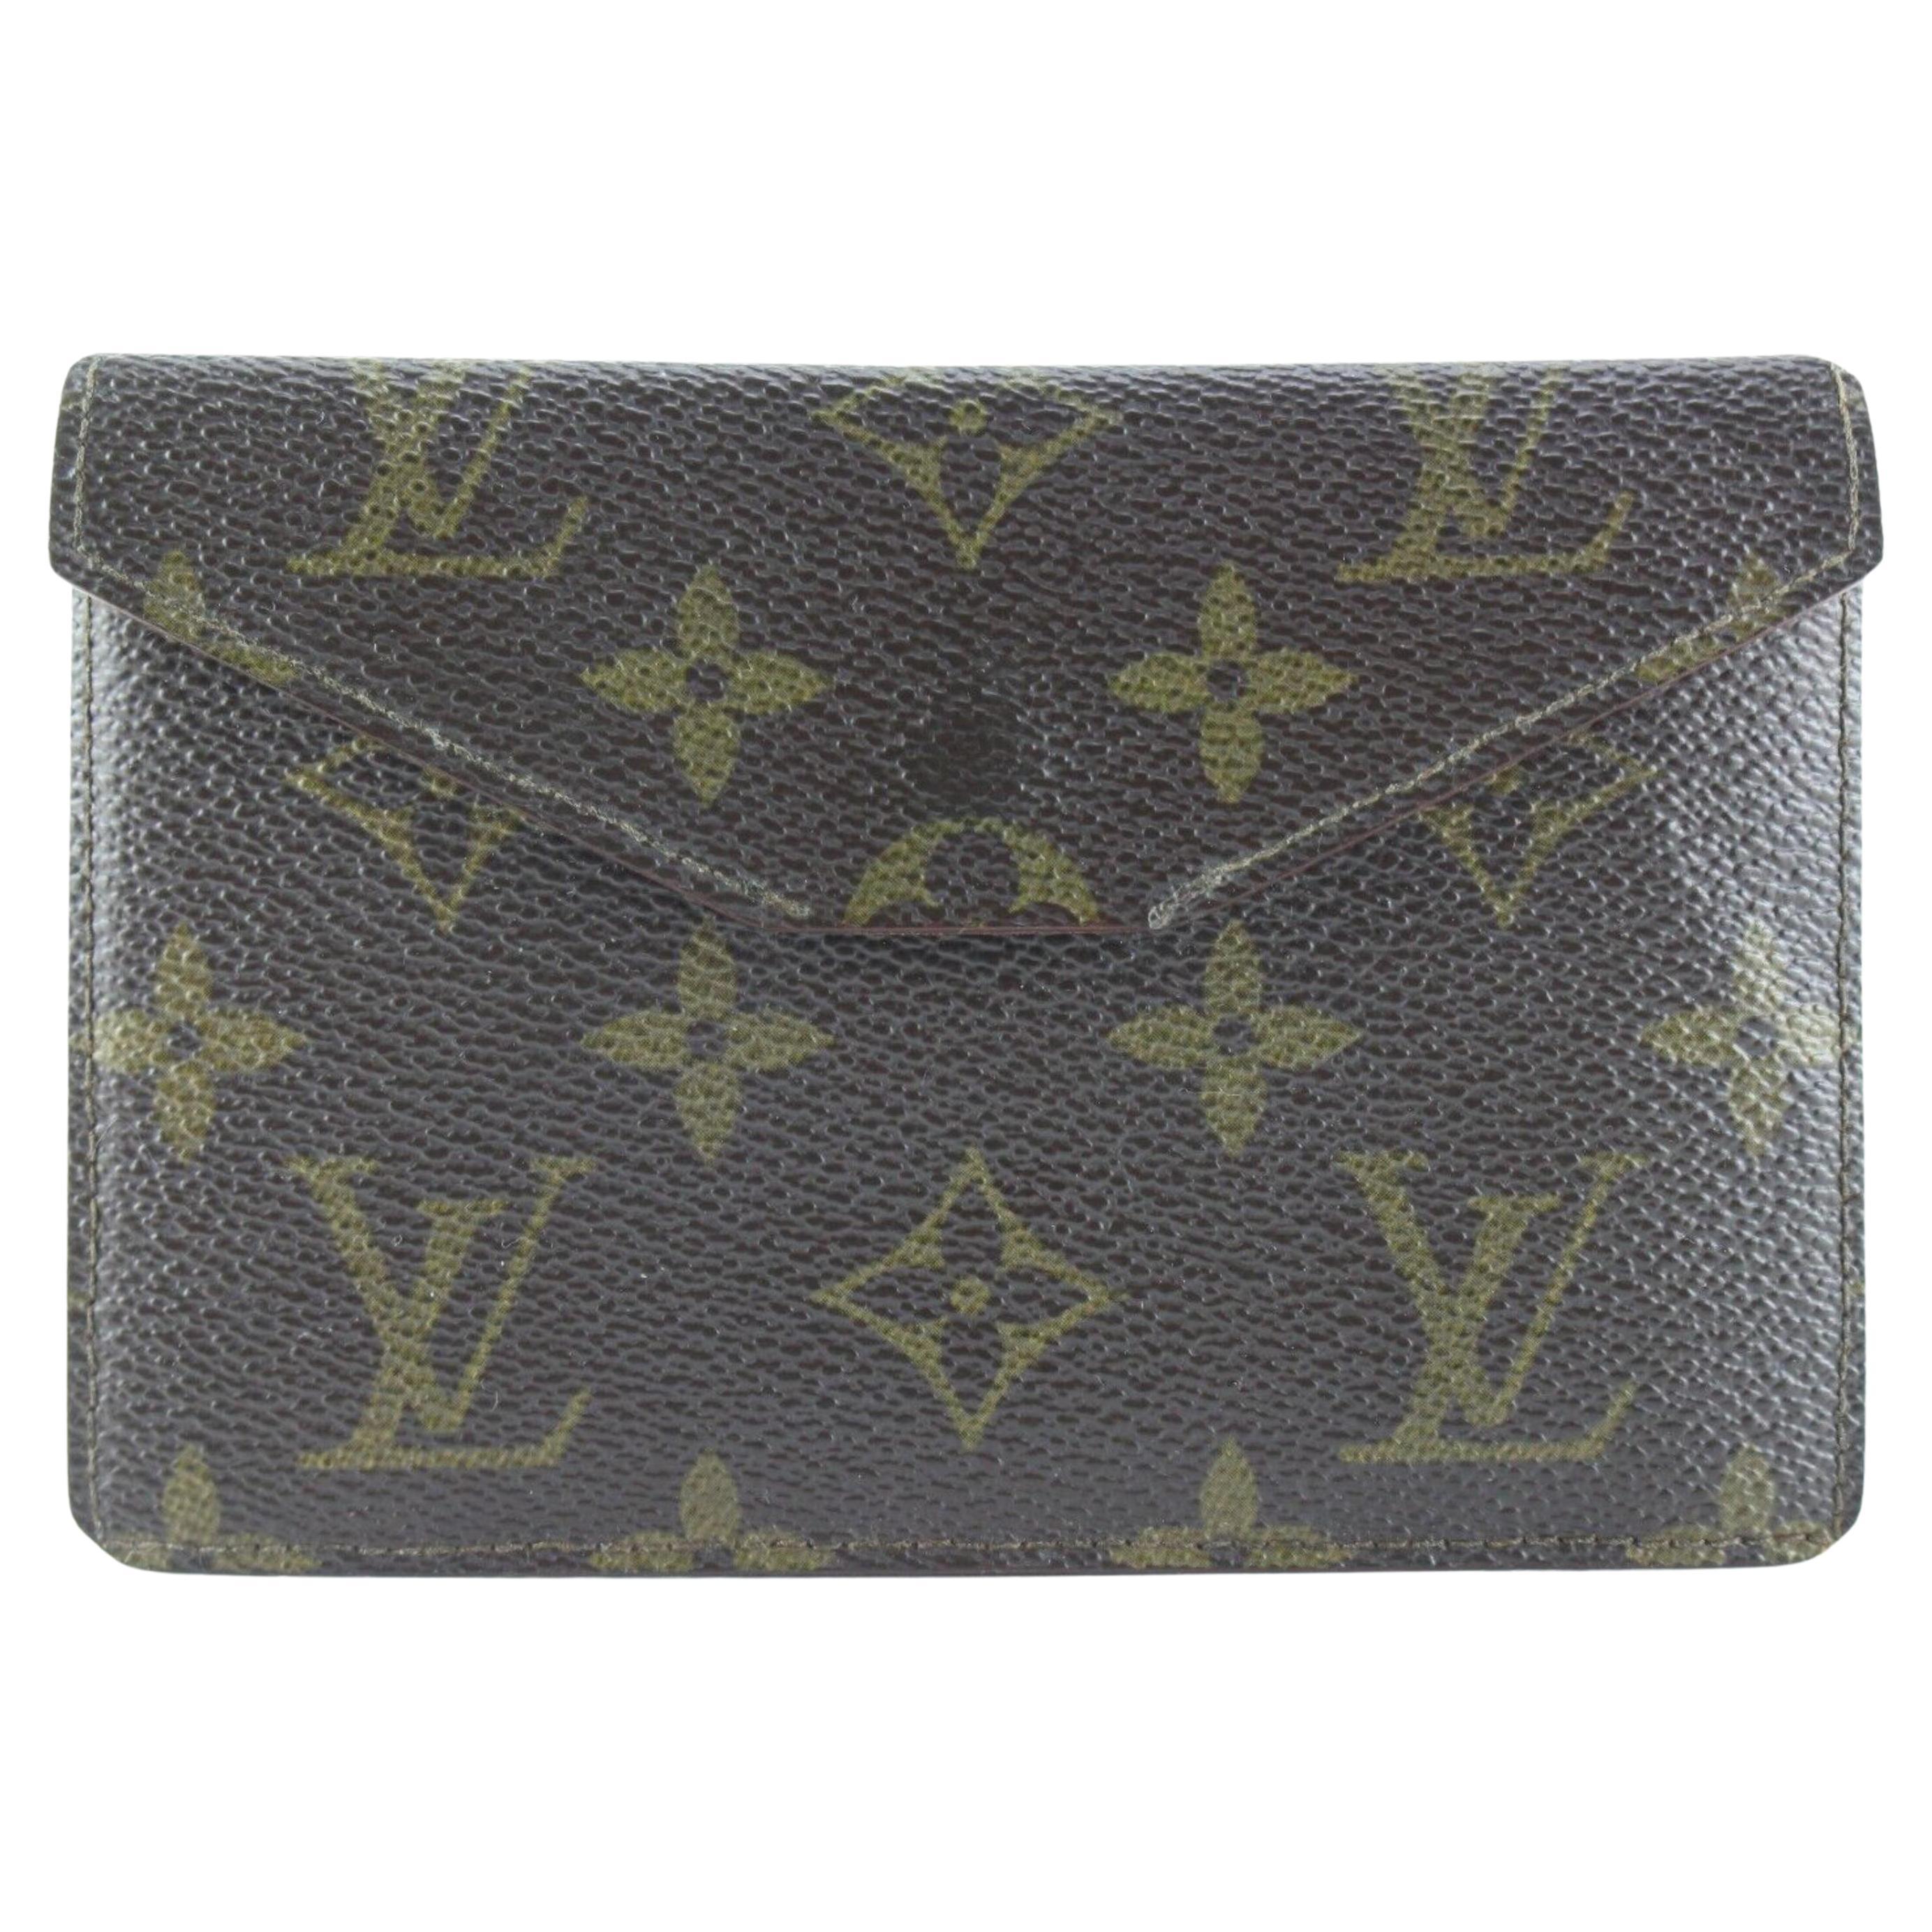 Louis Vuitton Extremely Rare Card Holder Envelope Pouch 3LV0509